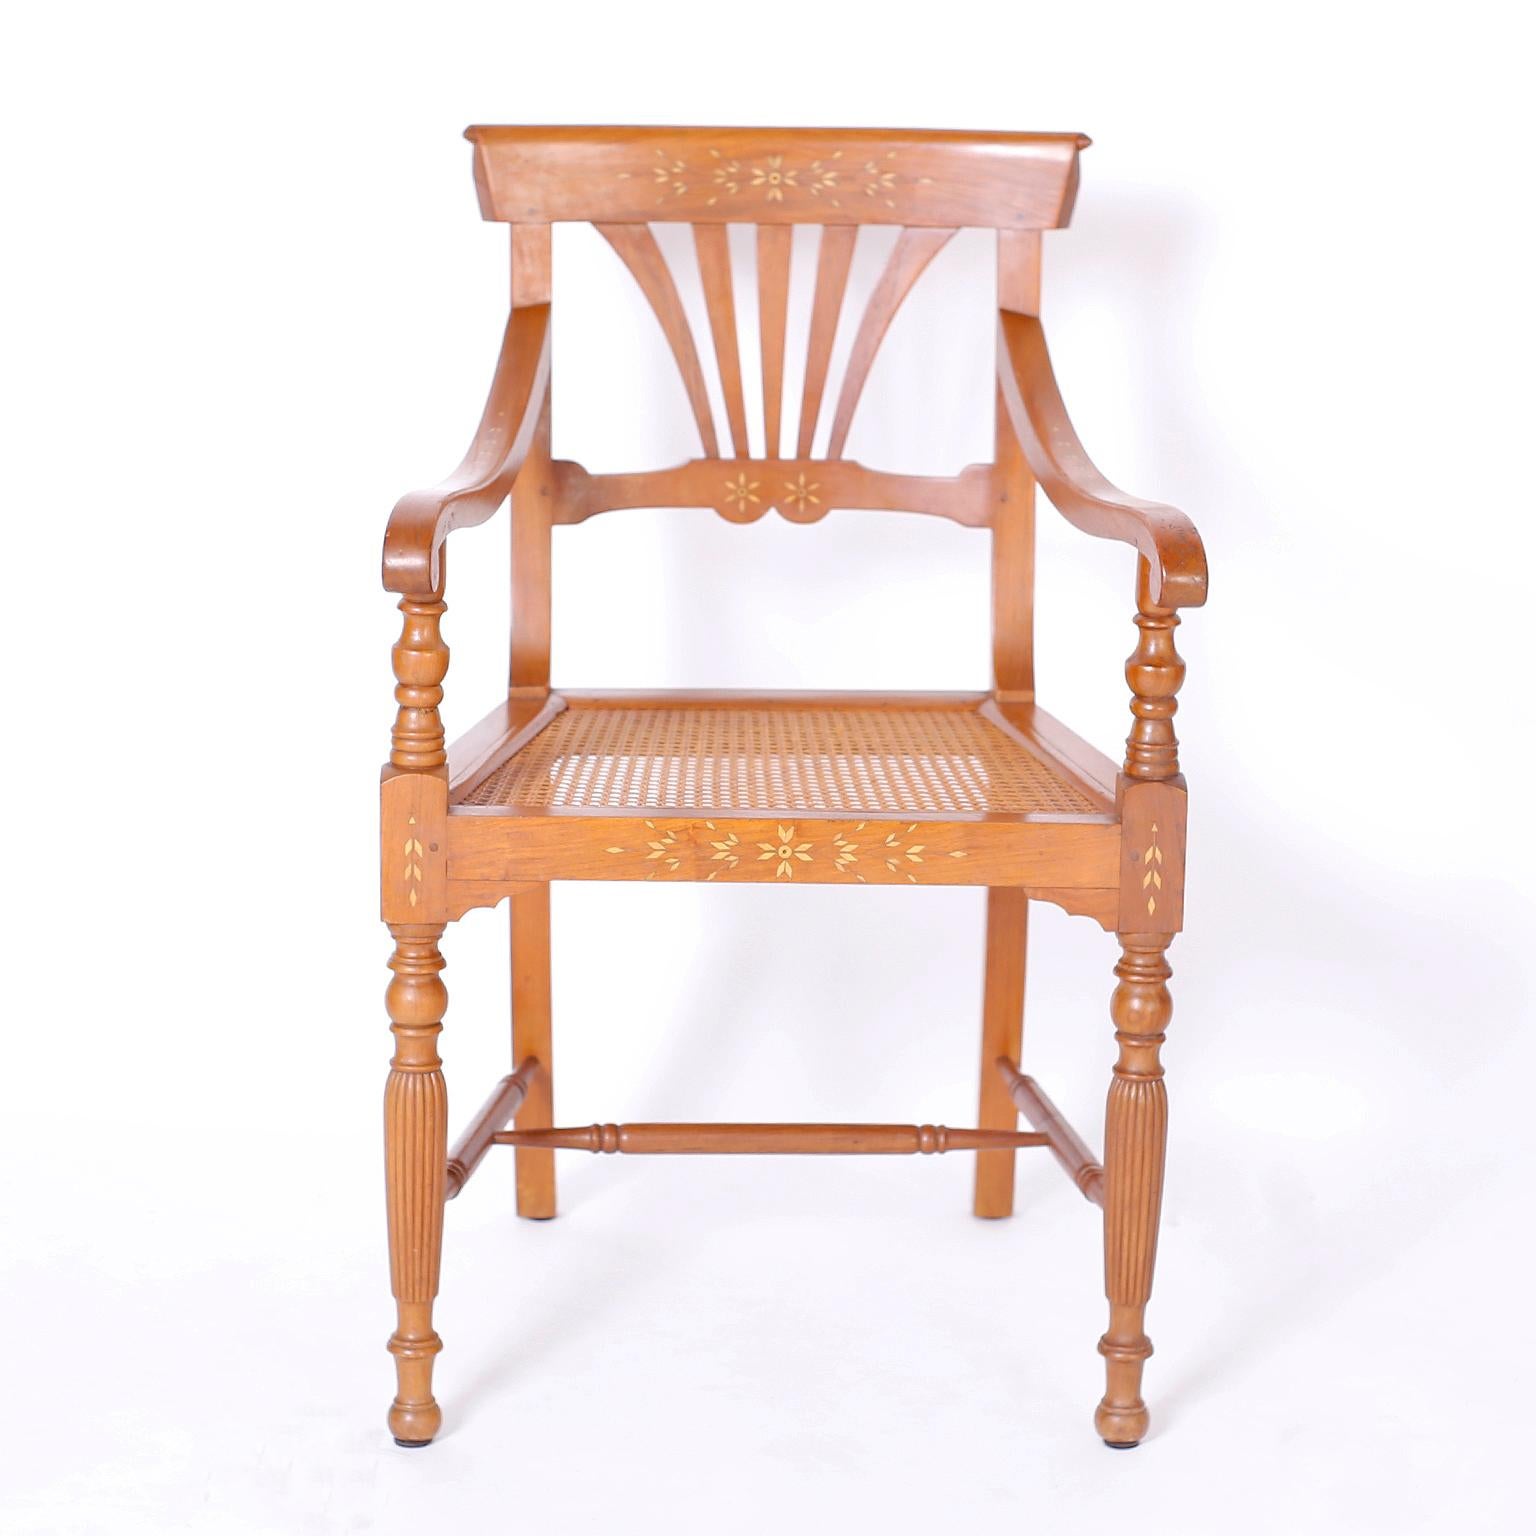 19th century armchair hand crafted in mahogany in the Philippines and featuring pegged construction, floral bone inlays, caned seat, graceful arms, turned and beaded front legs and an overall elegant form.